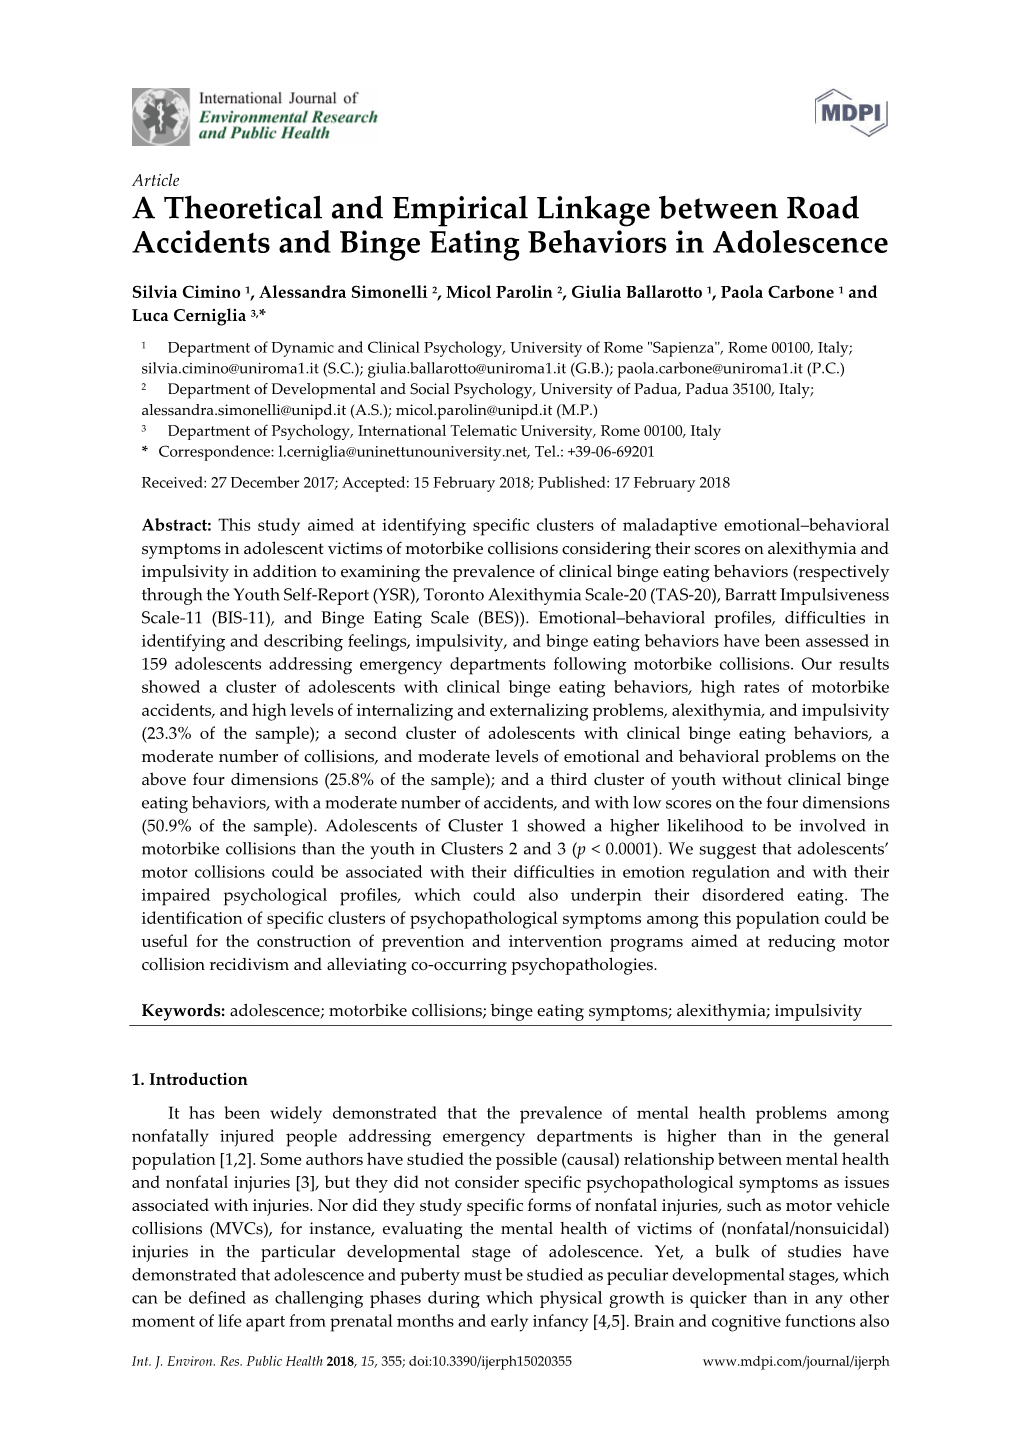 A Theoretical and Empirical Linkage Between Road Accidents and Binge Eating Behaviors in Adolescence